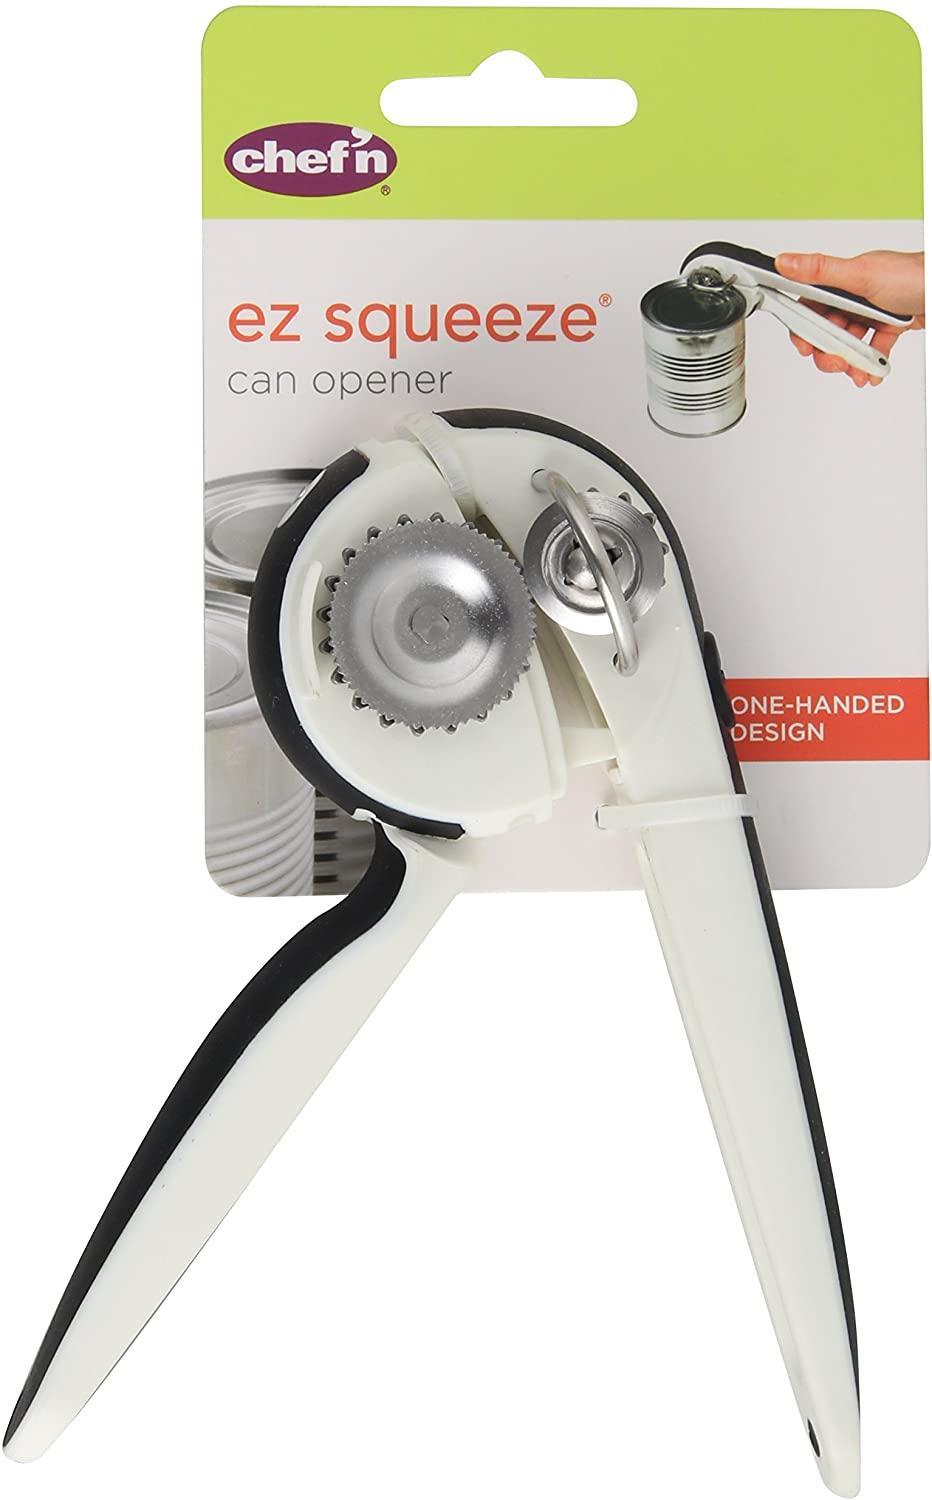 Zyliss Lock N' Lift Can Opener Review: Gets the Job Done